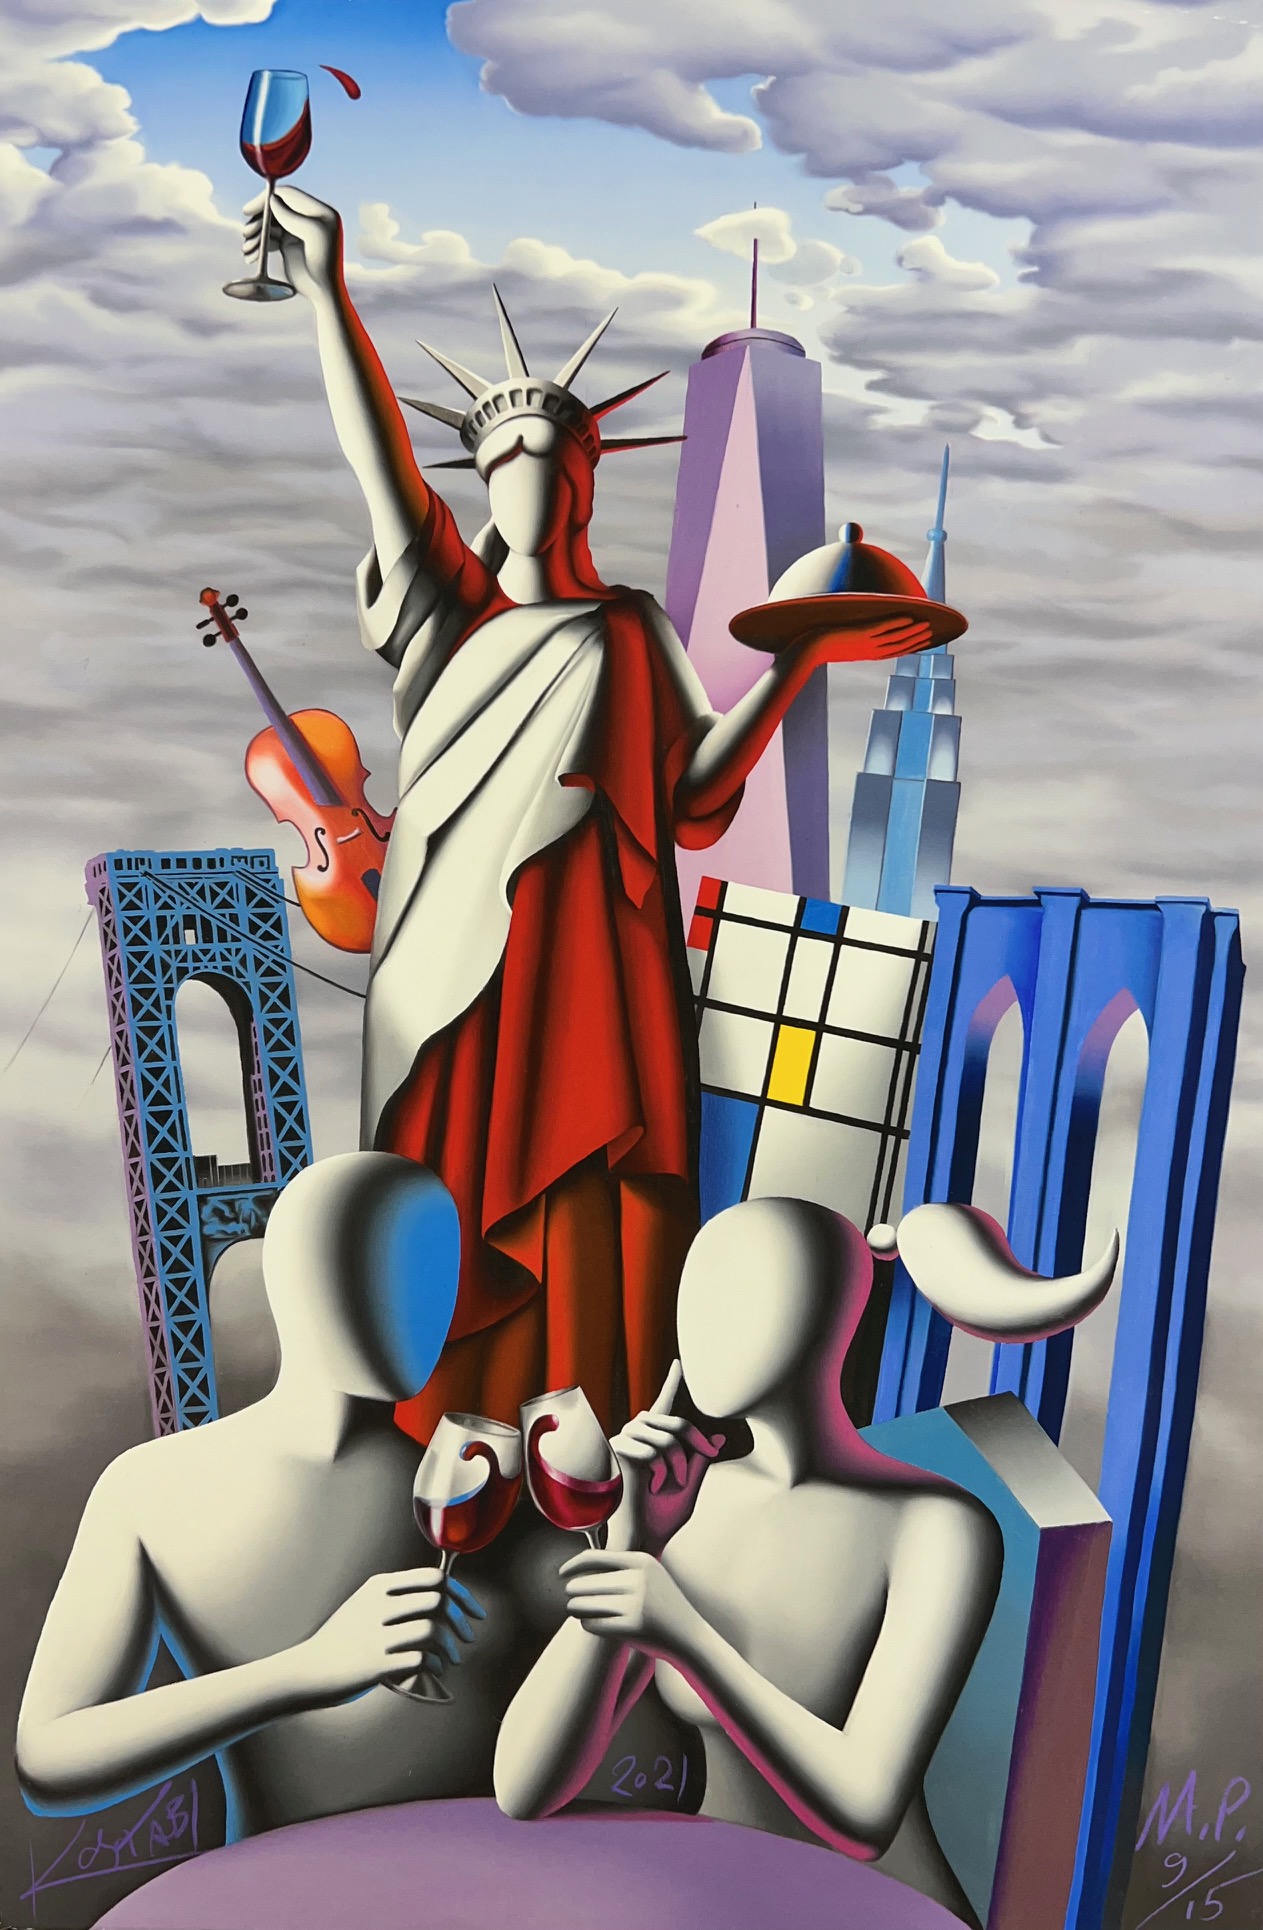 MARK KOSTABI - NY State of Mind - Limited Edition Giclee on Paper - 16.25x24.75 inches